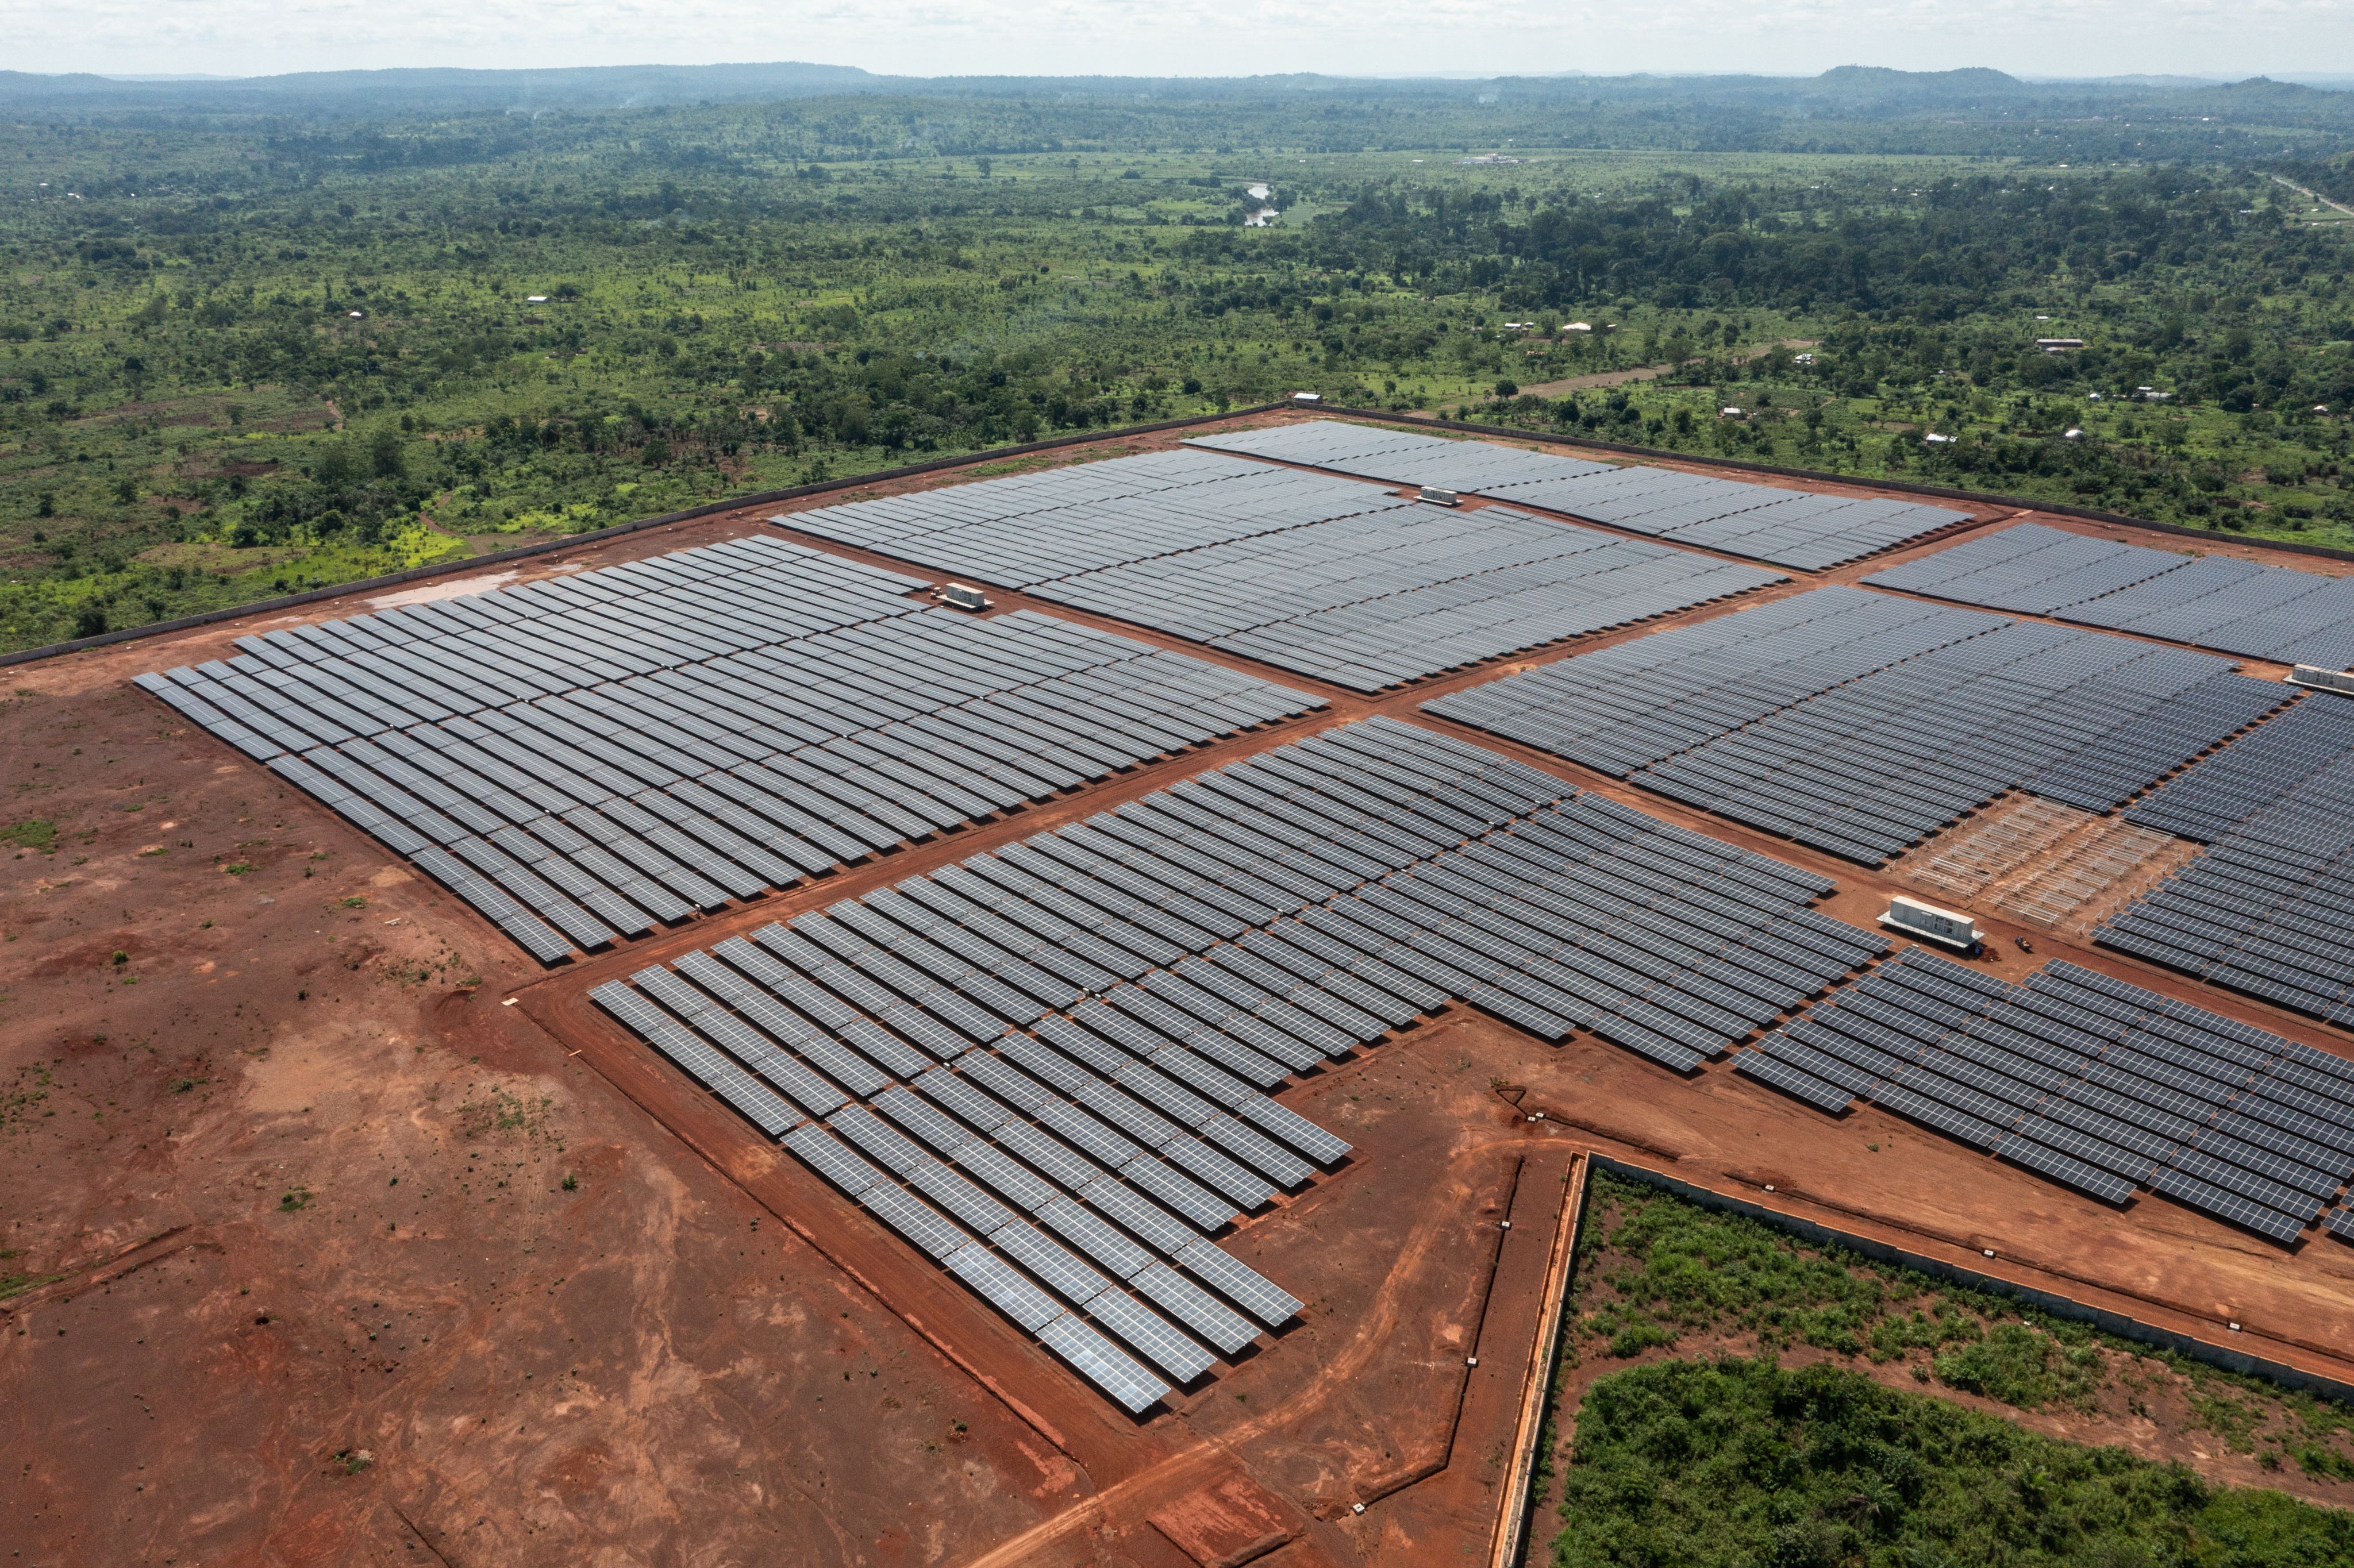 Aerial view of the solar park in Bangui, Central African Republic.